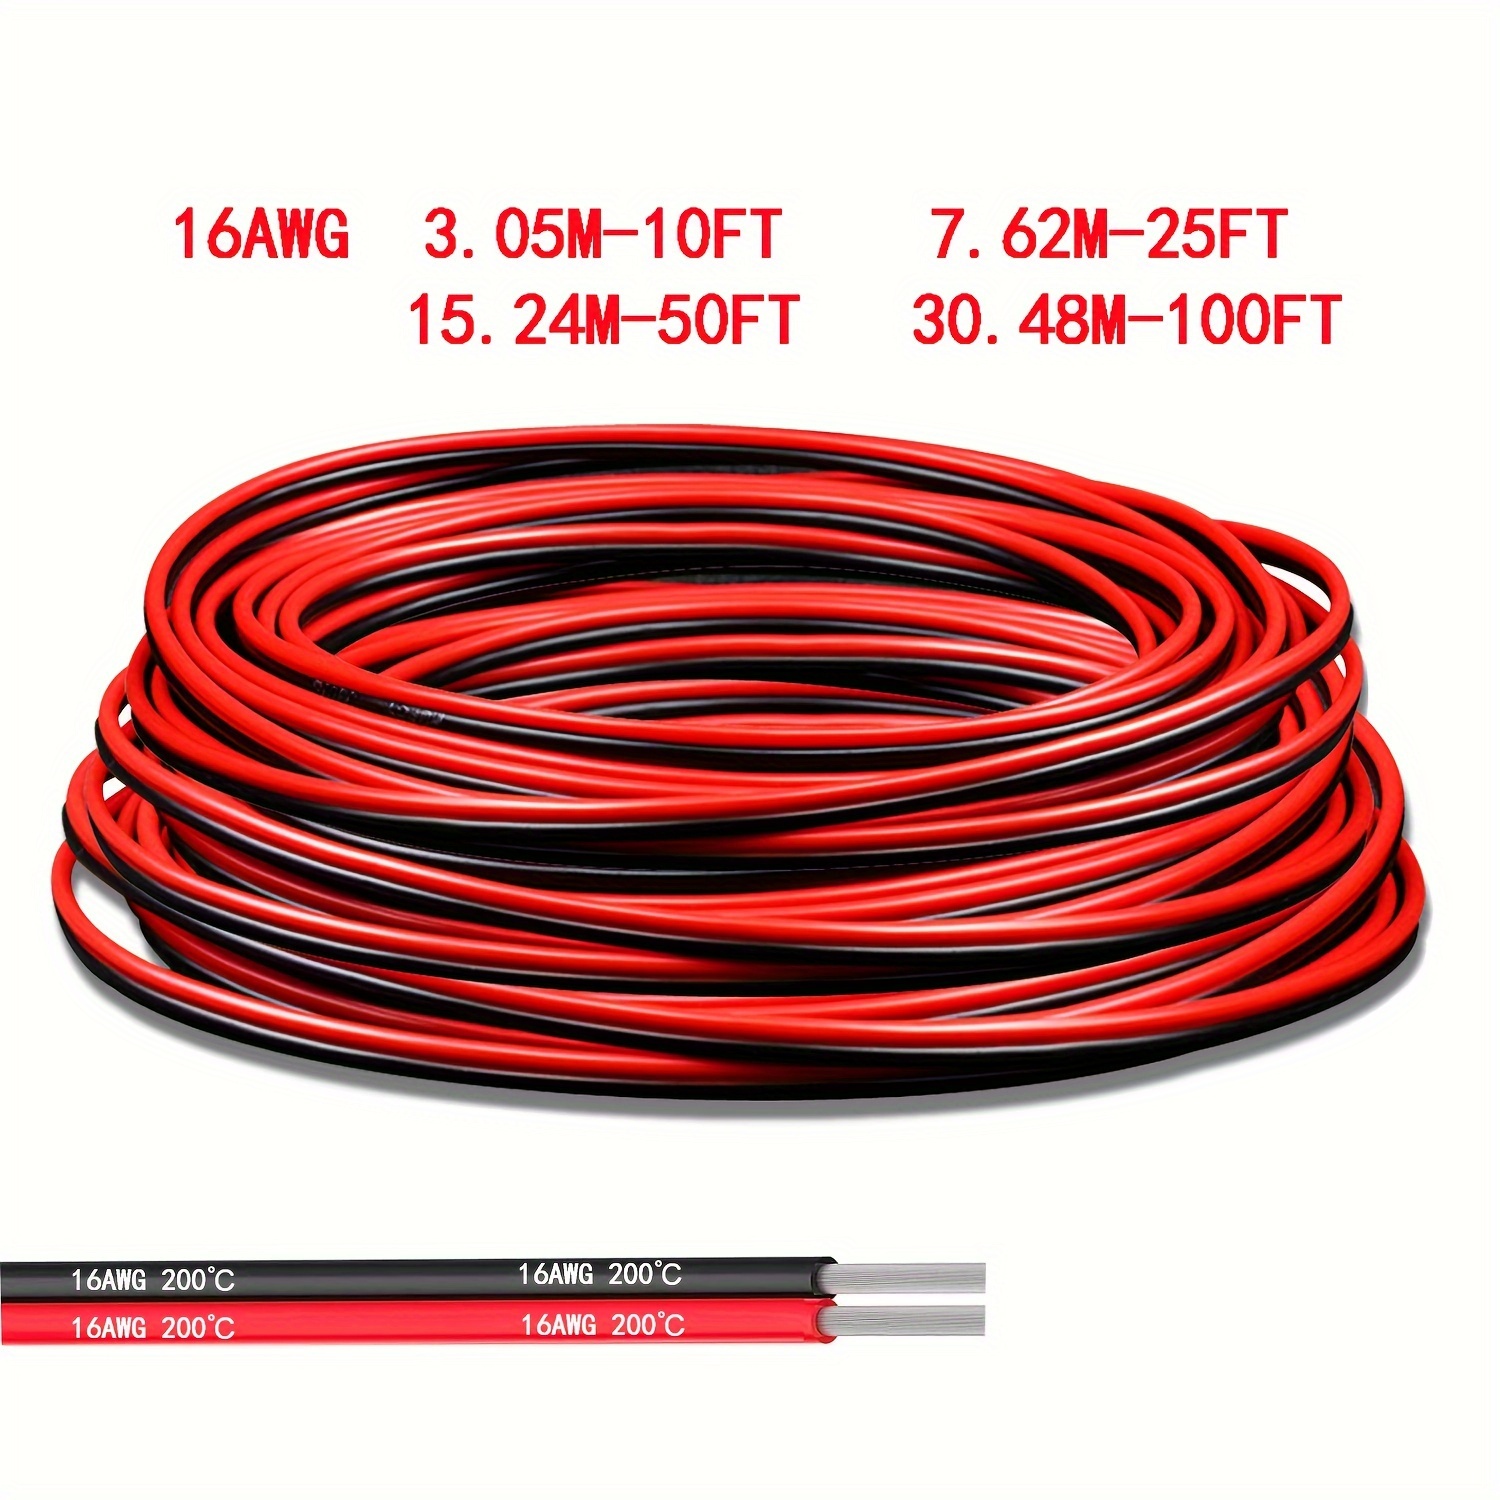 18 awg Silicone Electrical Wire Cable 7 Colors (4 Meters) 18 Gauge Hookup  Wires kit Stranded Tinned Copper Wire Flexible - AliExpress